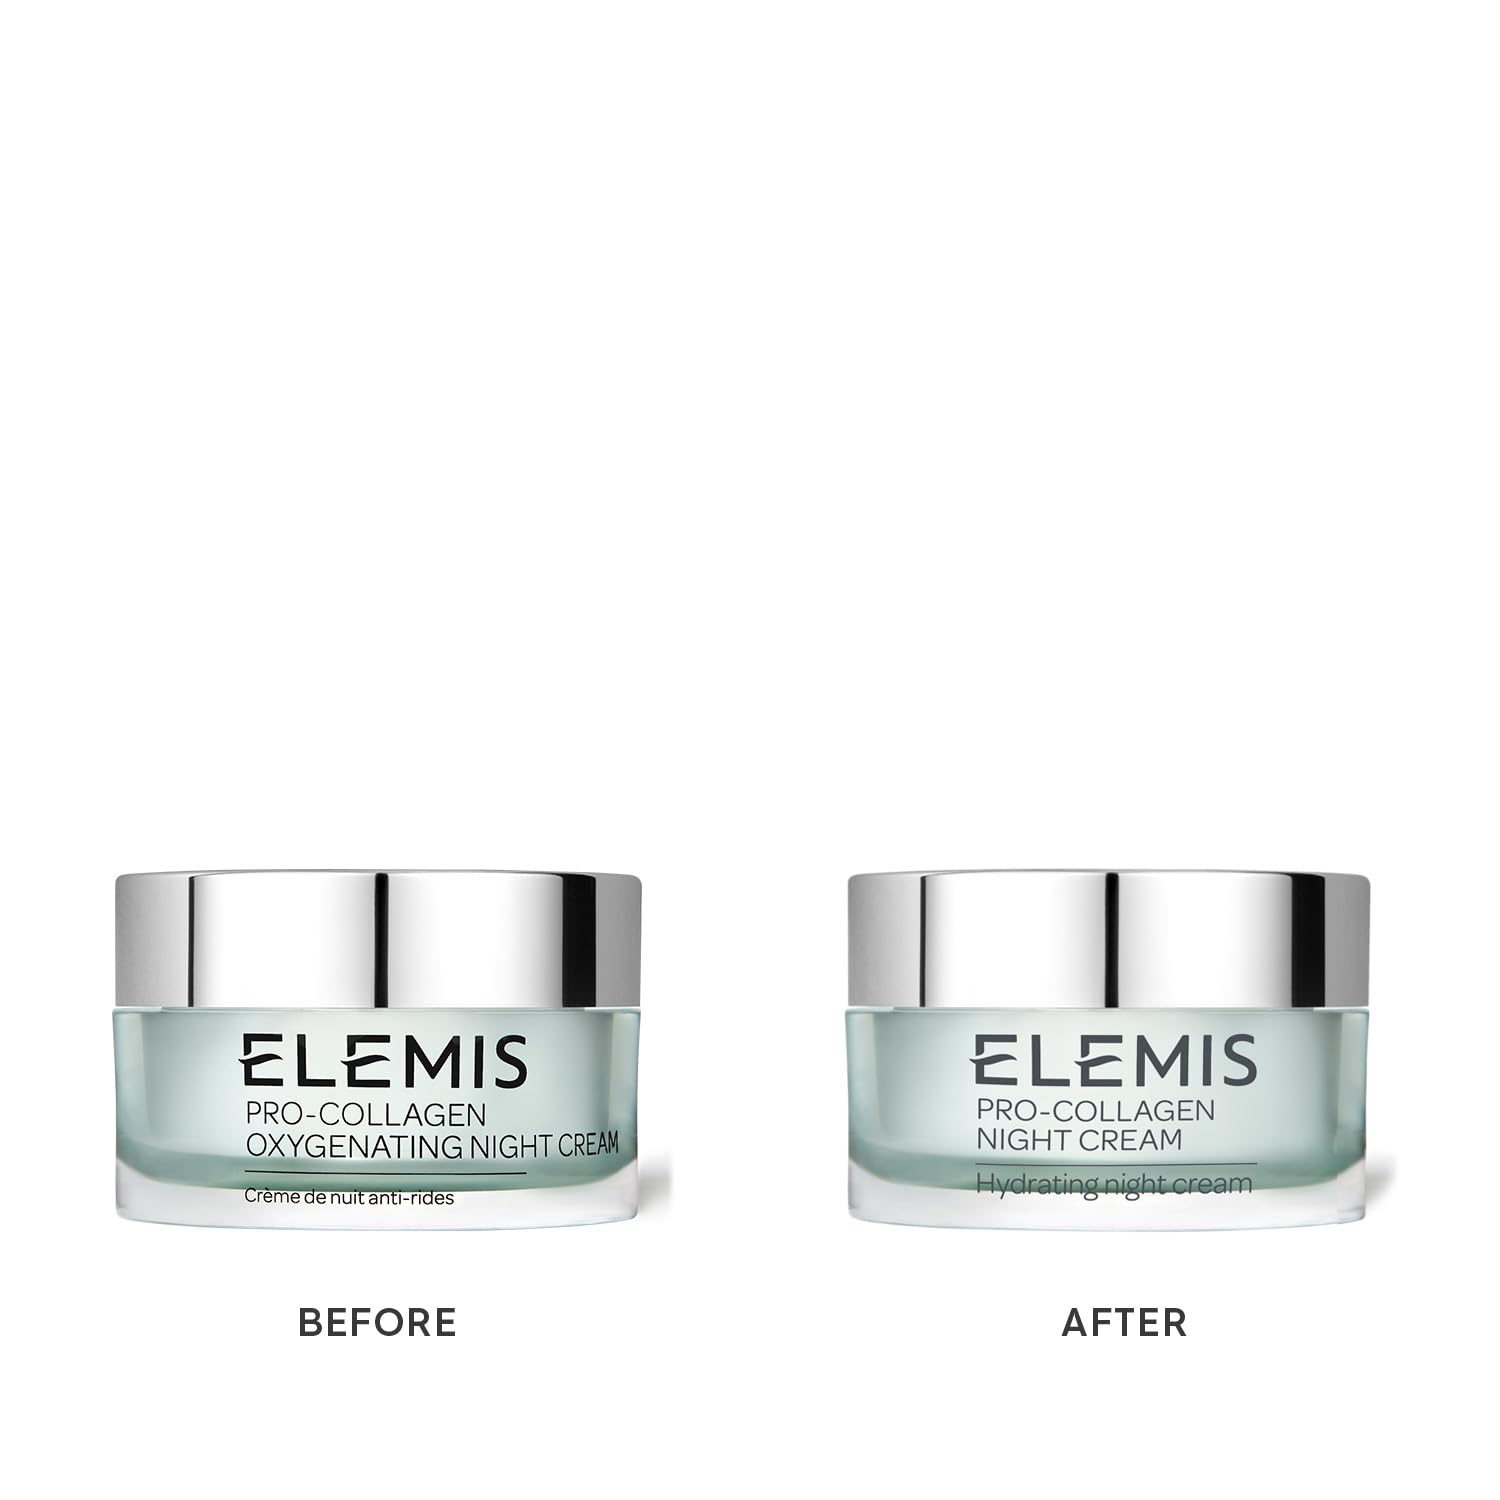 ELEMIS Pro-Collagen Night Cream | Ultra Rich Daily Face Moisturizer Firms, Smoothes and Replenishes the Skin with Antioxidants, 1.6 Fl Oz